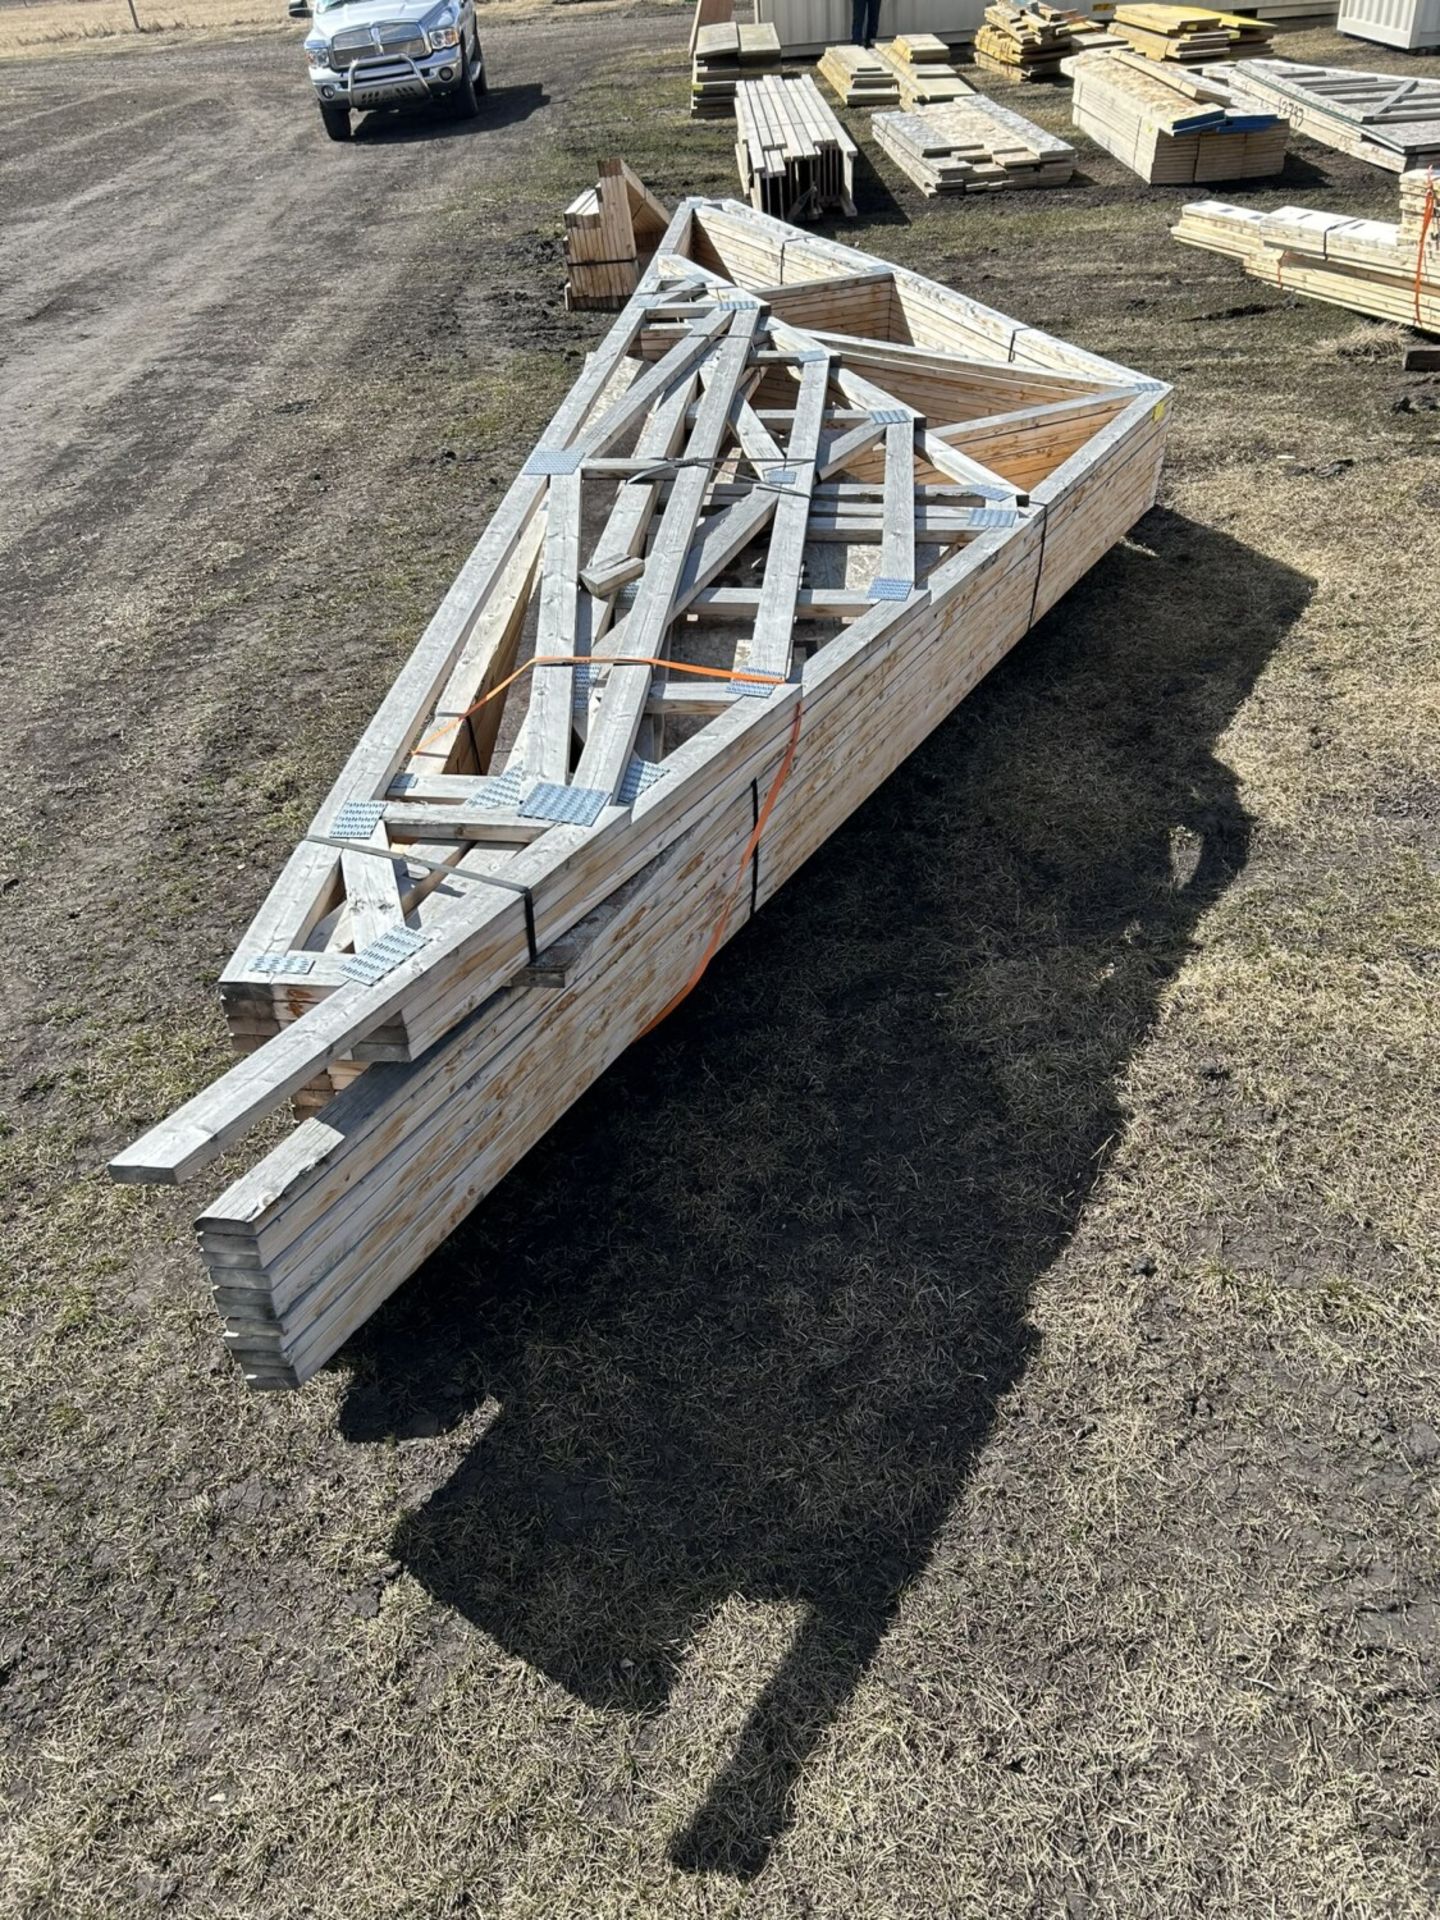 PACKAGE OF WOOD TRUSSES - 25'6" OVERALL, 7'-4 1/2" TO PEAK 12" HEEL, 30FT TRUSSES ON BOTTOM OF STACK - Image 7 of 8